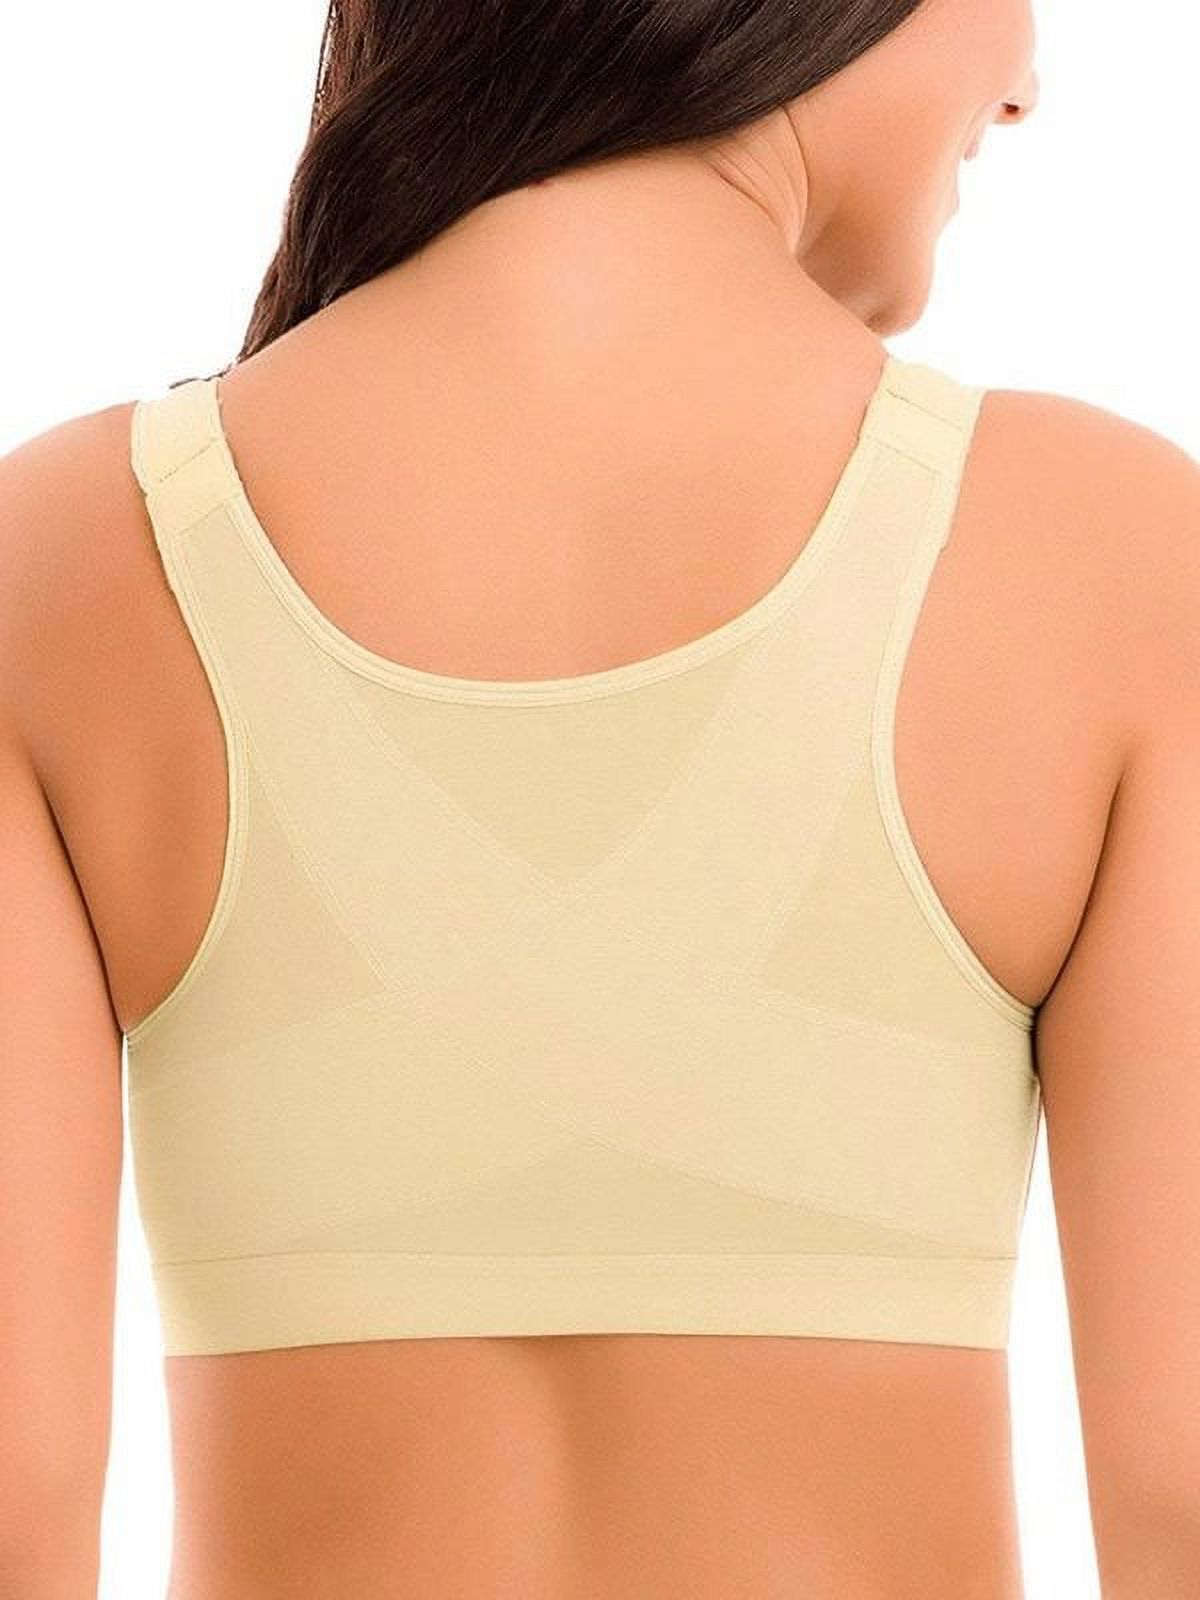 Women's Full Figure No Bounce Plus Size Camisole Wirefree Back Close Sports Bra - image 3 of 4